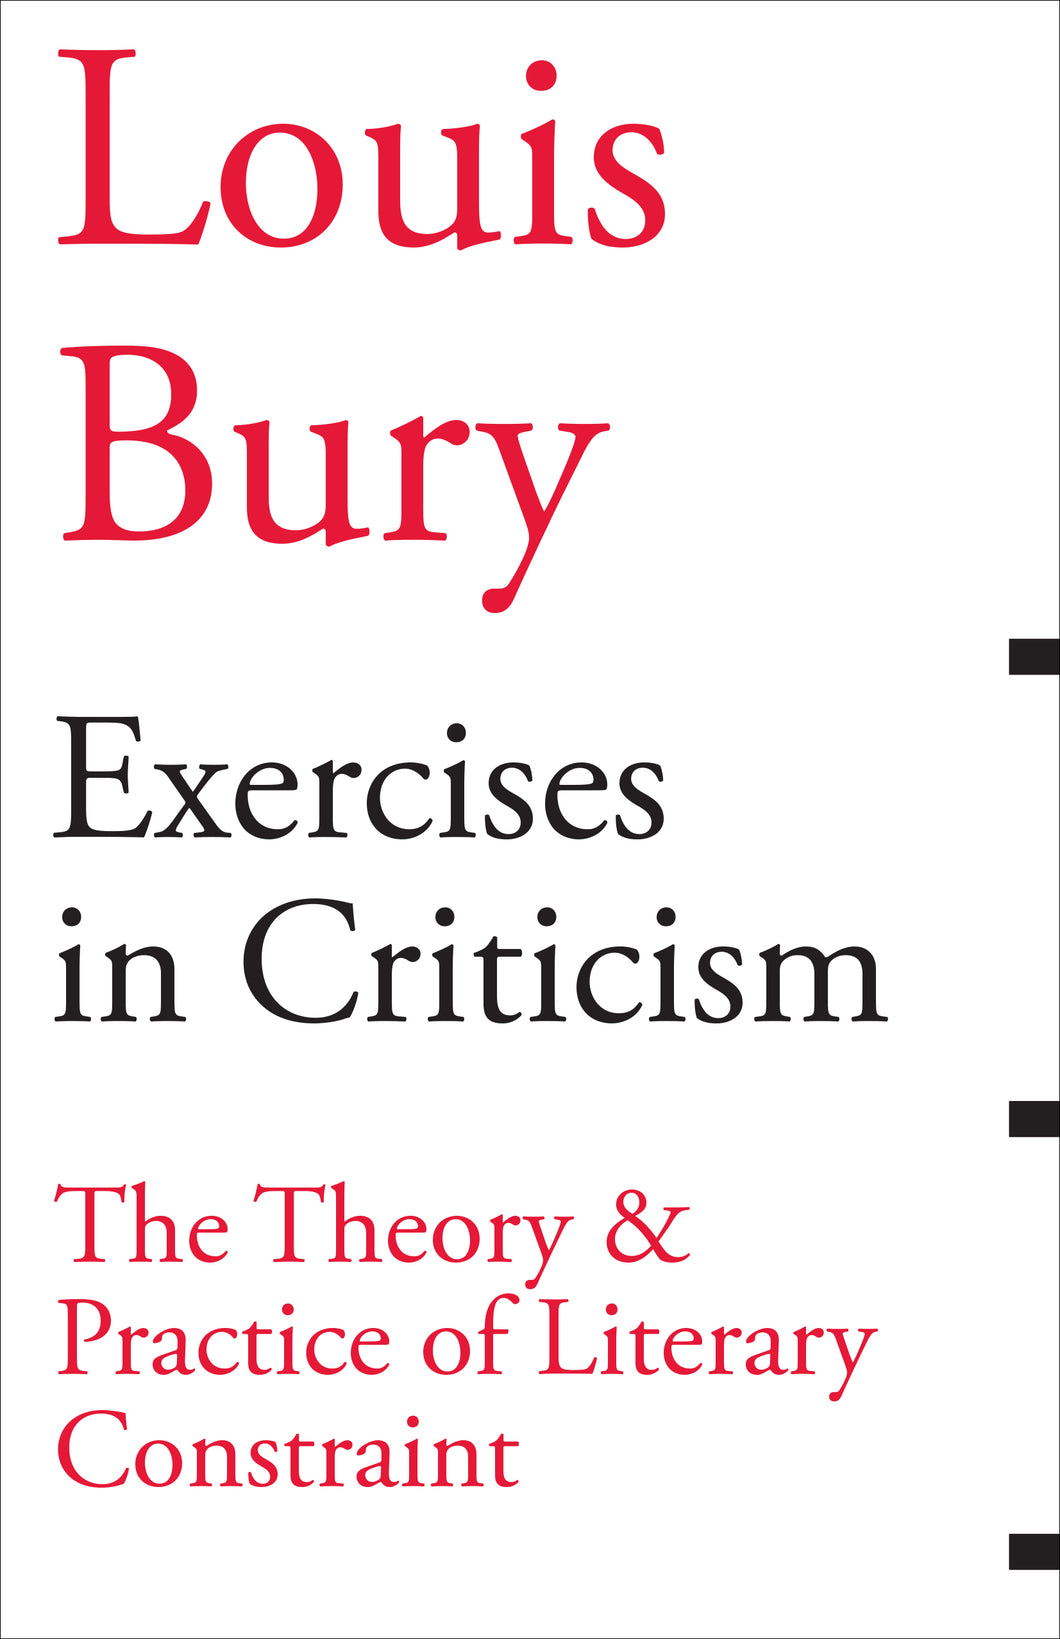 Louis Bury / Excersises in Critisism cover